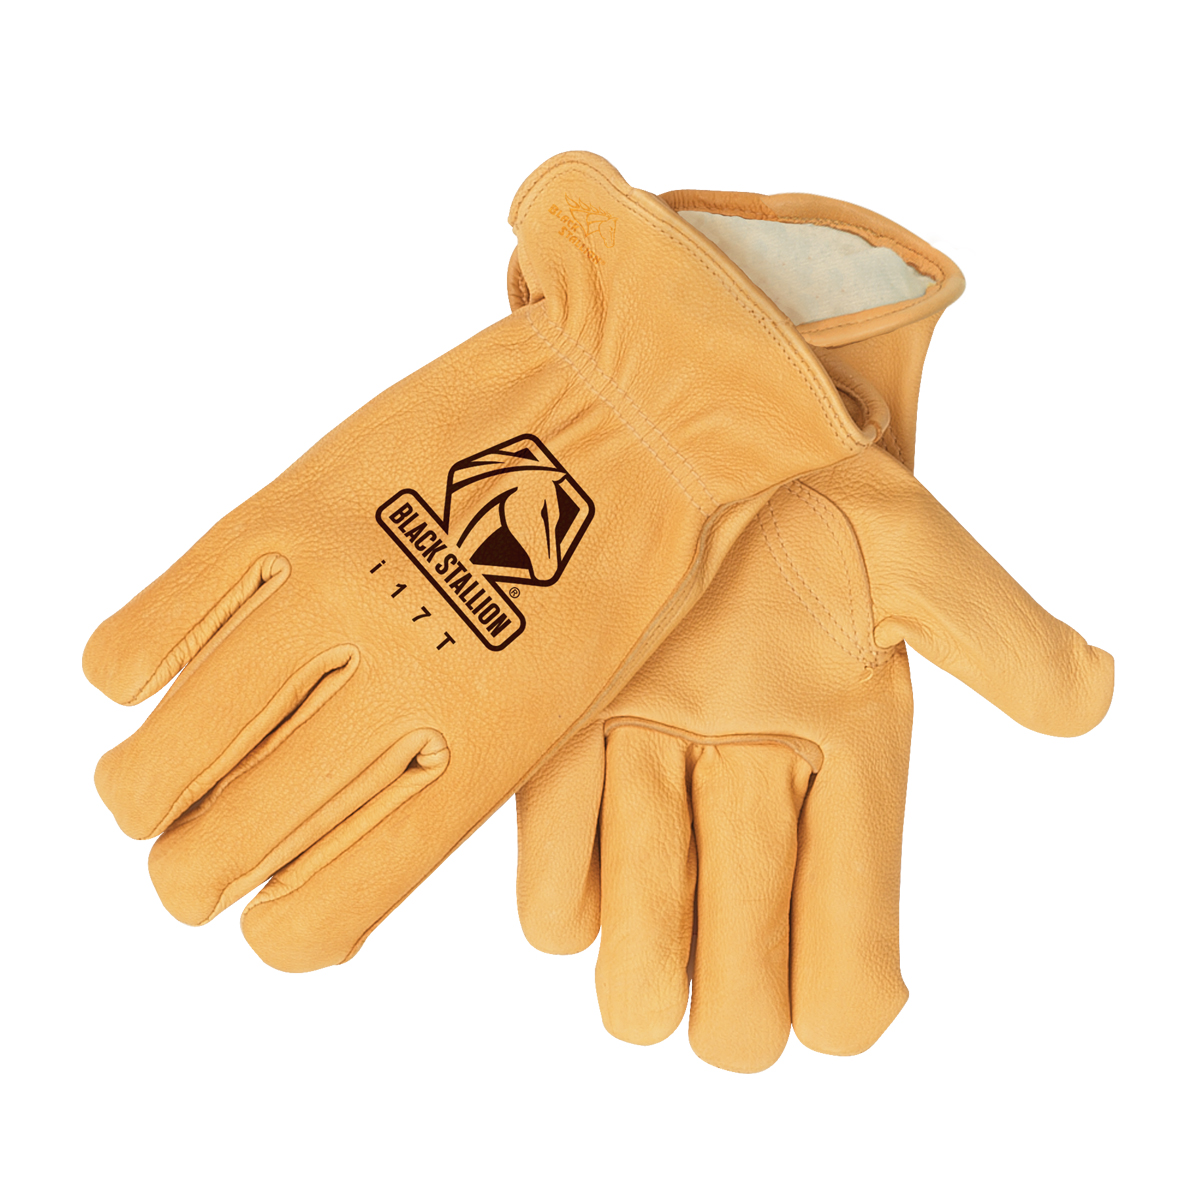 GRAIN ELKSKIN -- THINSULATE INSULATED DRIVER'S STYLE GLOVES